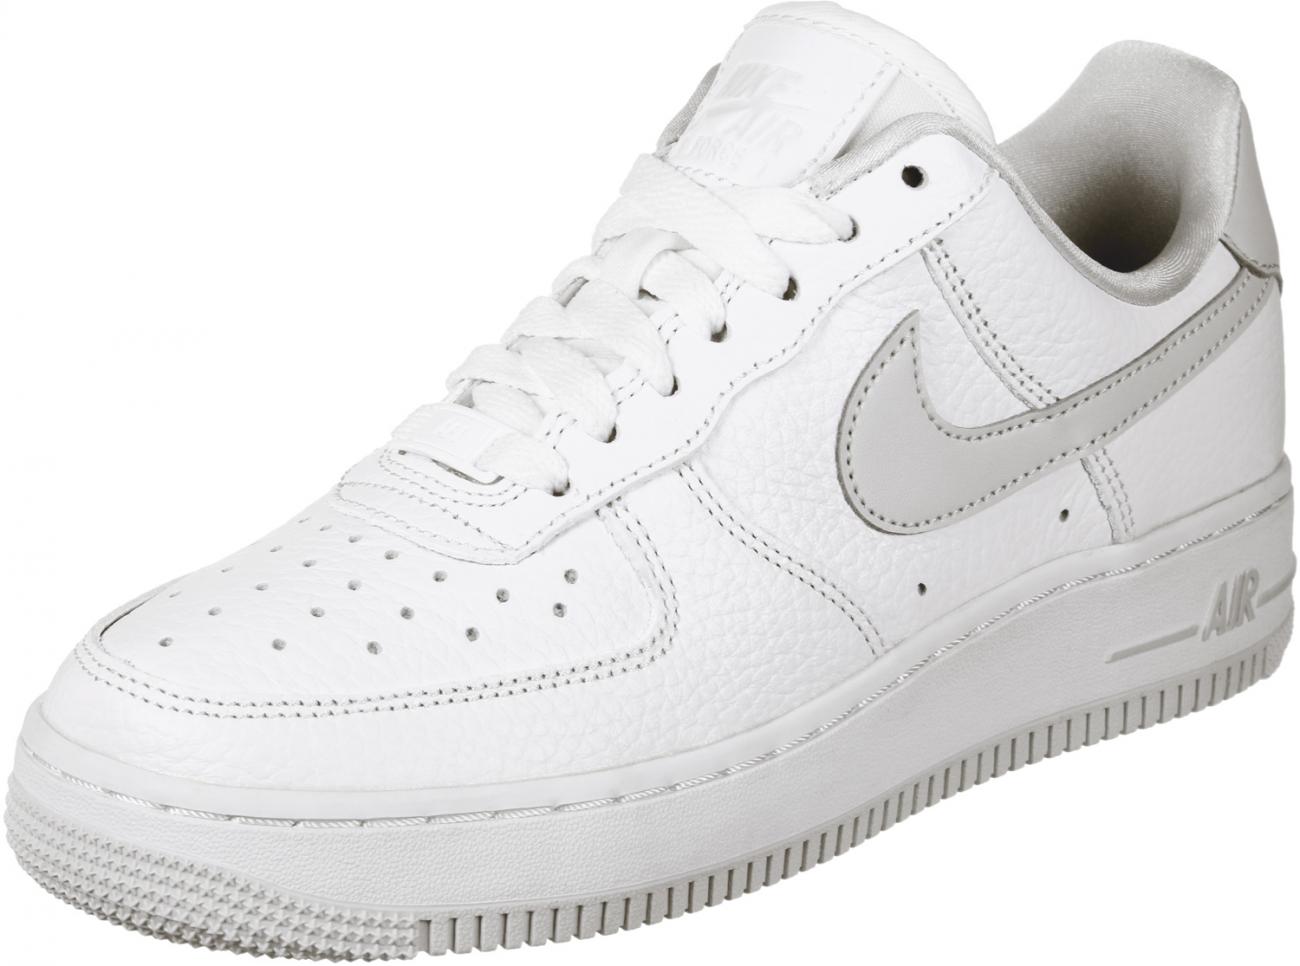 femme air force 1 07 blanche,Nike AIR FORCE 1 07 LEATHER W ...